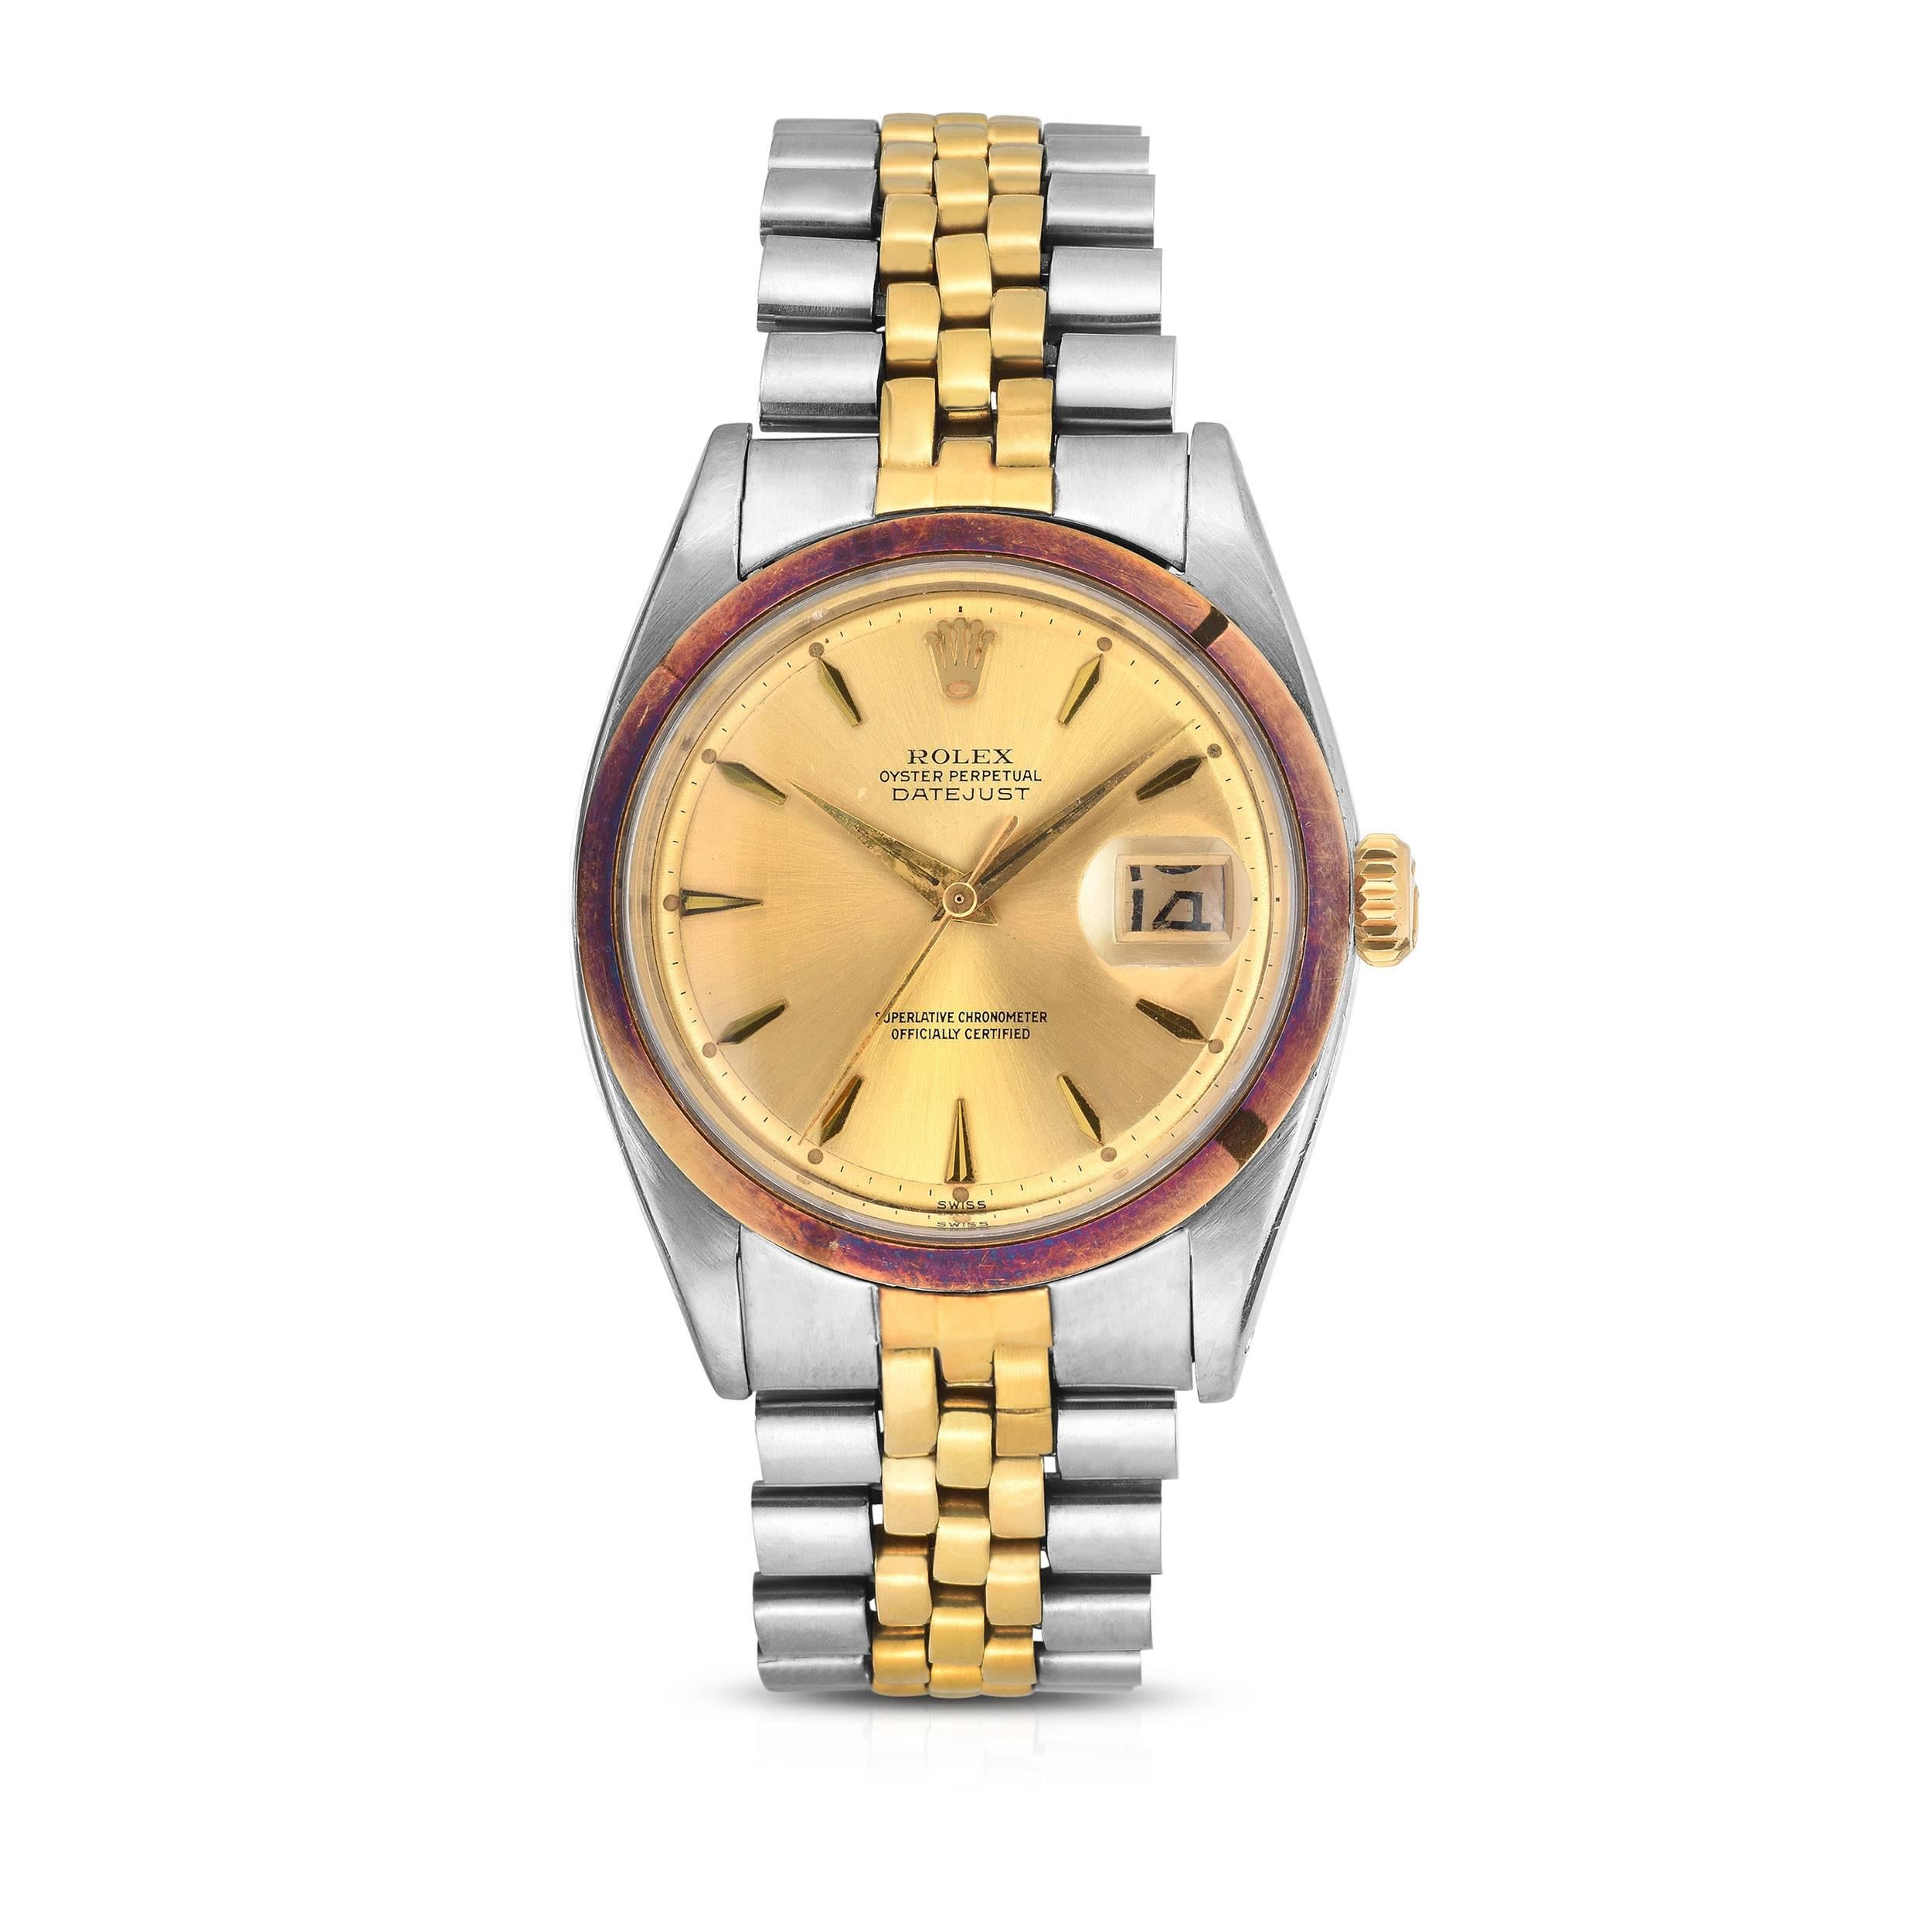 Rolex Stainless Steel and Oyster Perpetual Datejust Watch
Beautiful Factory Champagne 'swiss' dial with Applied Dagger Hour Markers and Matching Dauphine Hands
18K Yellow Gold Smooth Bezel with  Rainbow Appearence from Oxidation
Bezel and Case are